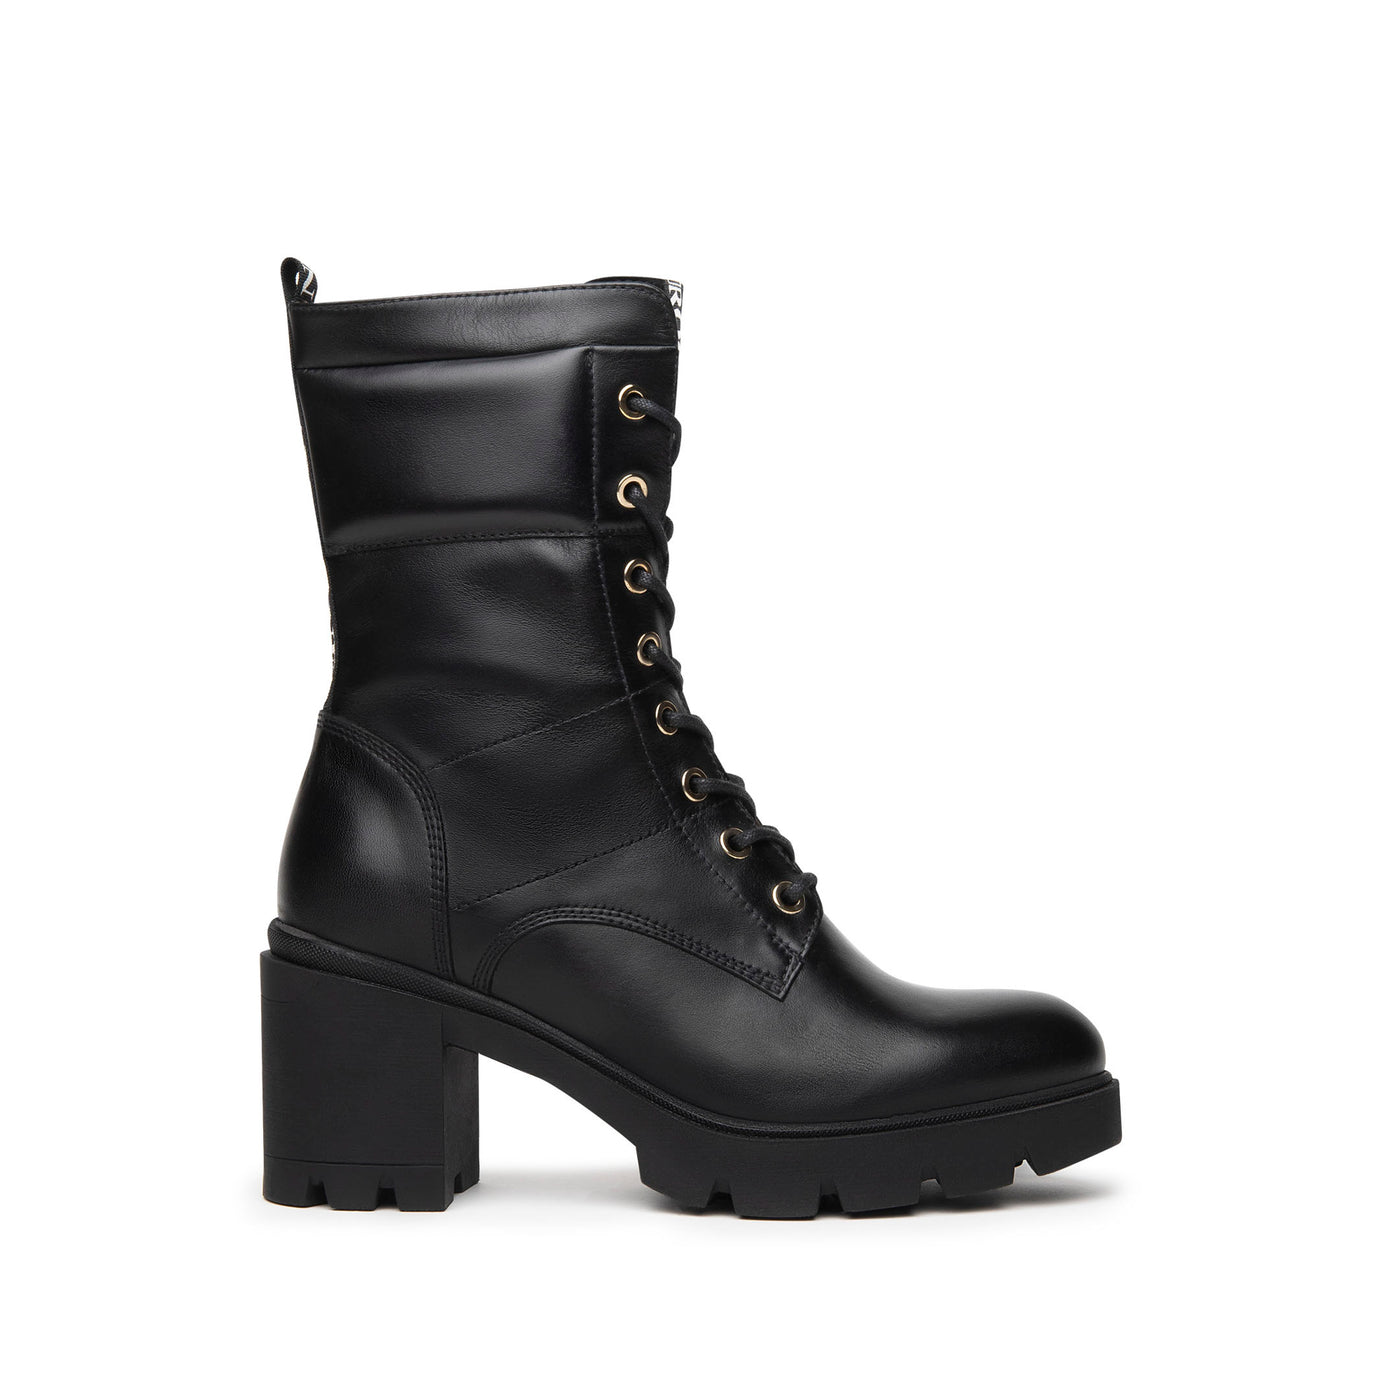 NeroGiardini - I013773D MED HEEL CALF LENGTH LACED BOOT WITH ZIP - BLACK